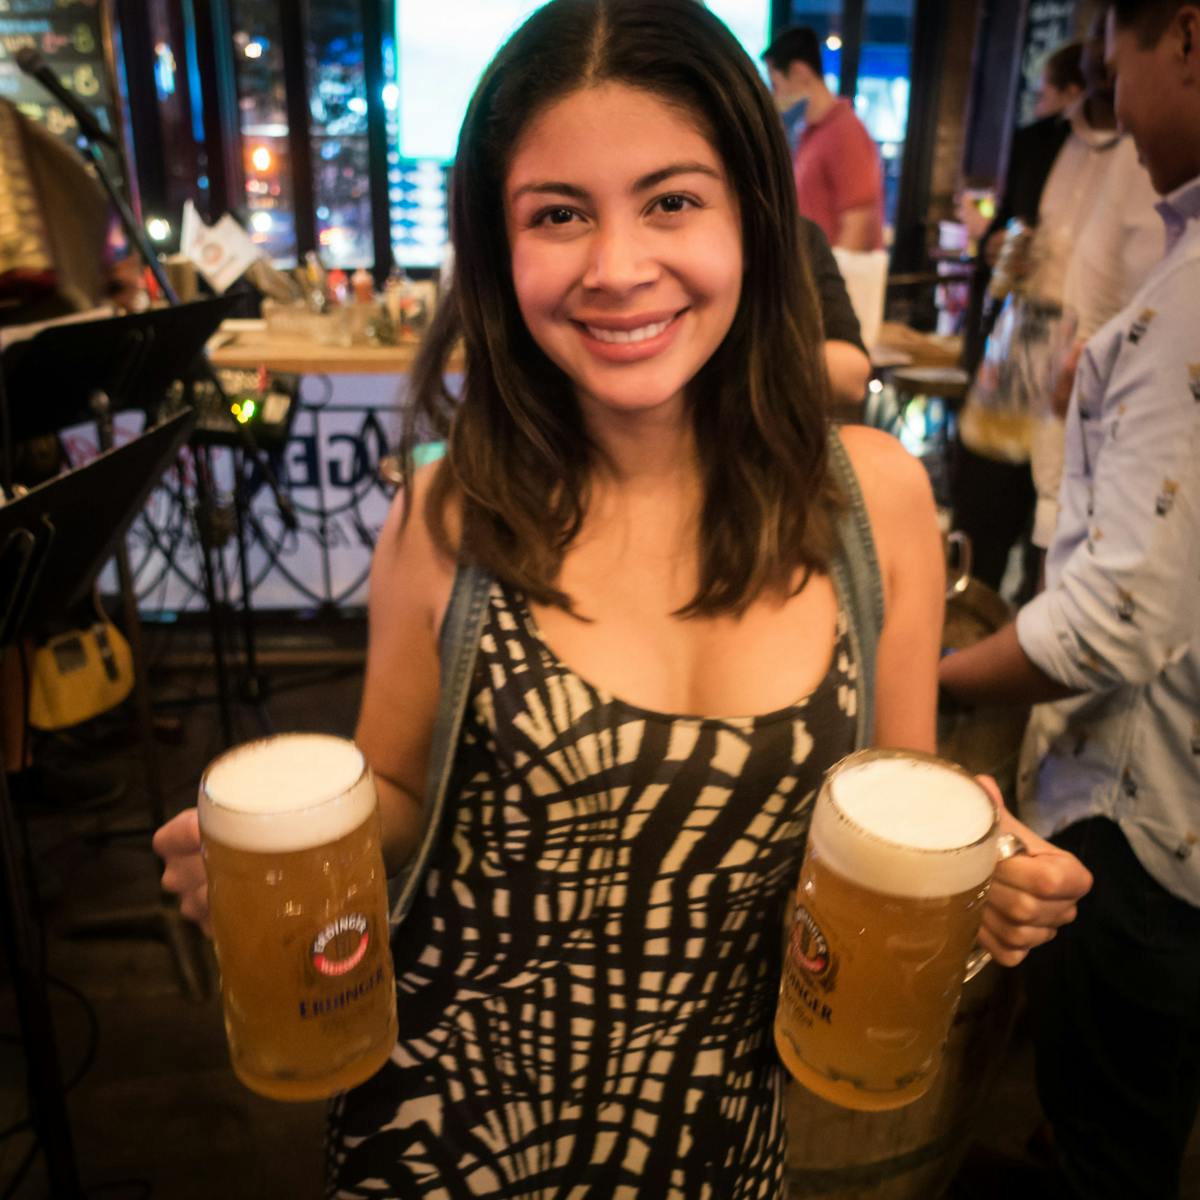 Girl with Beers - OktoberFest 2016 at Treadwell Park